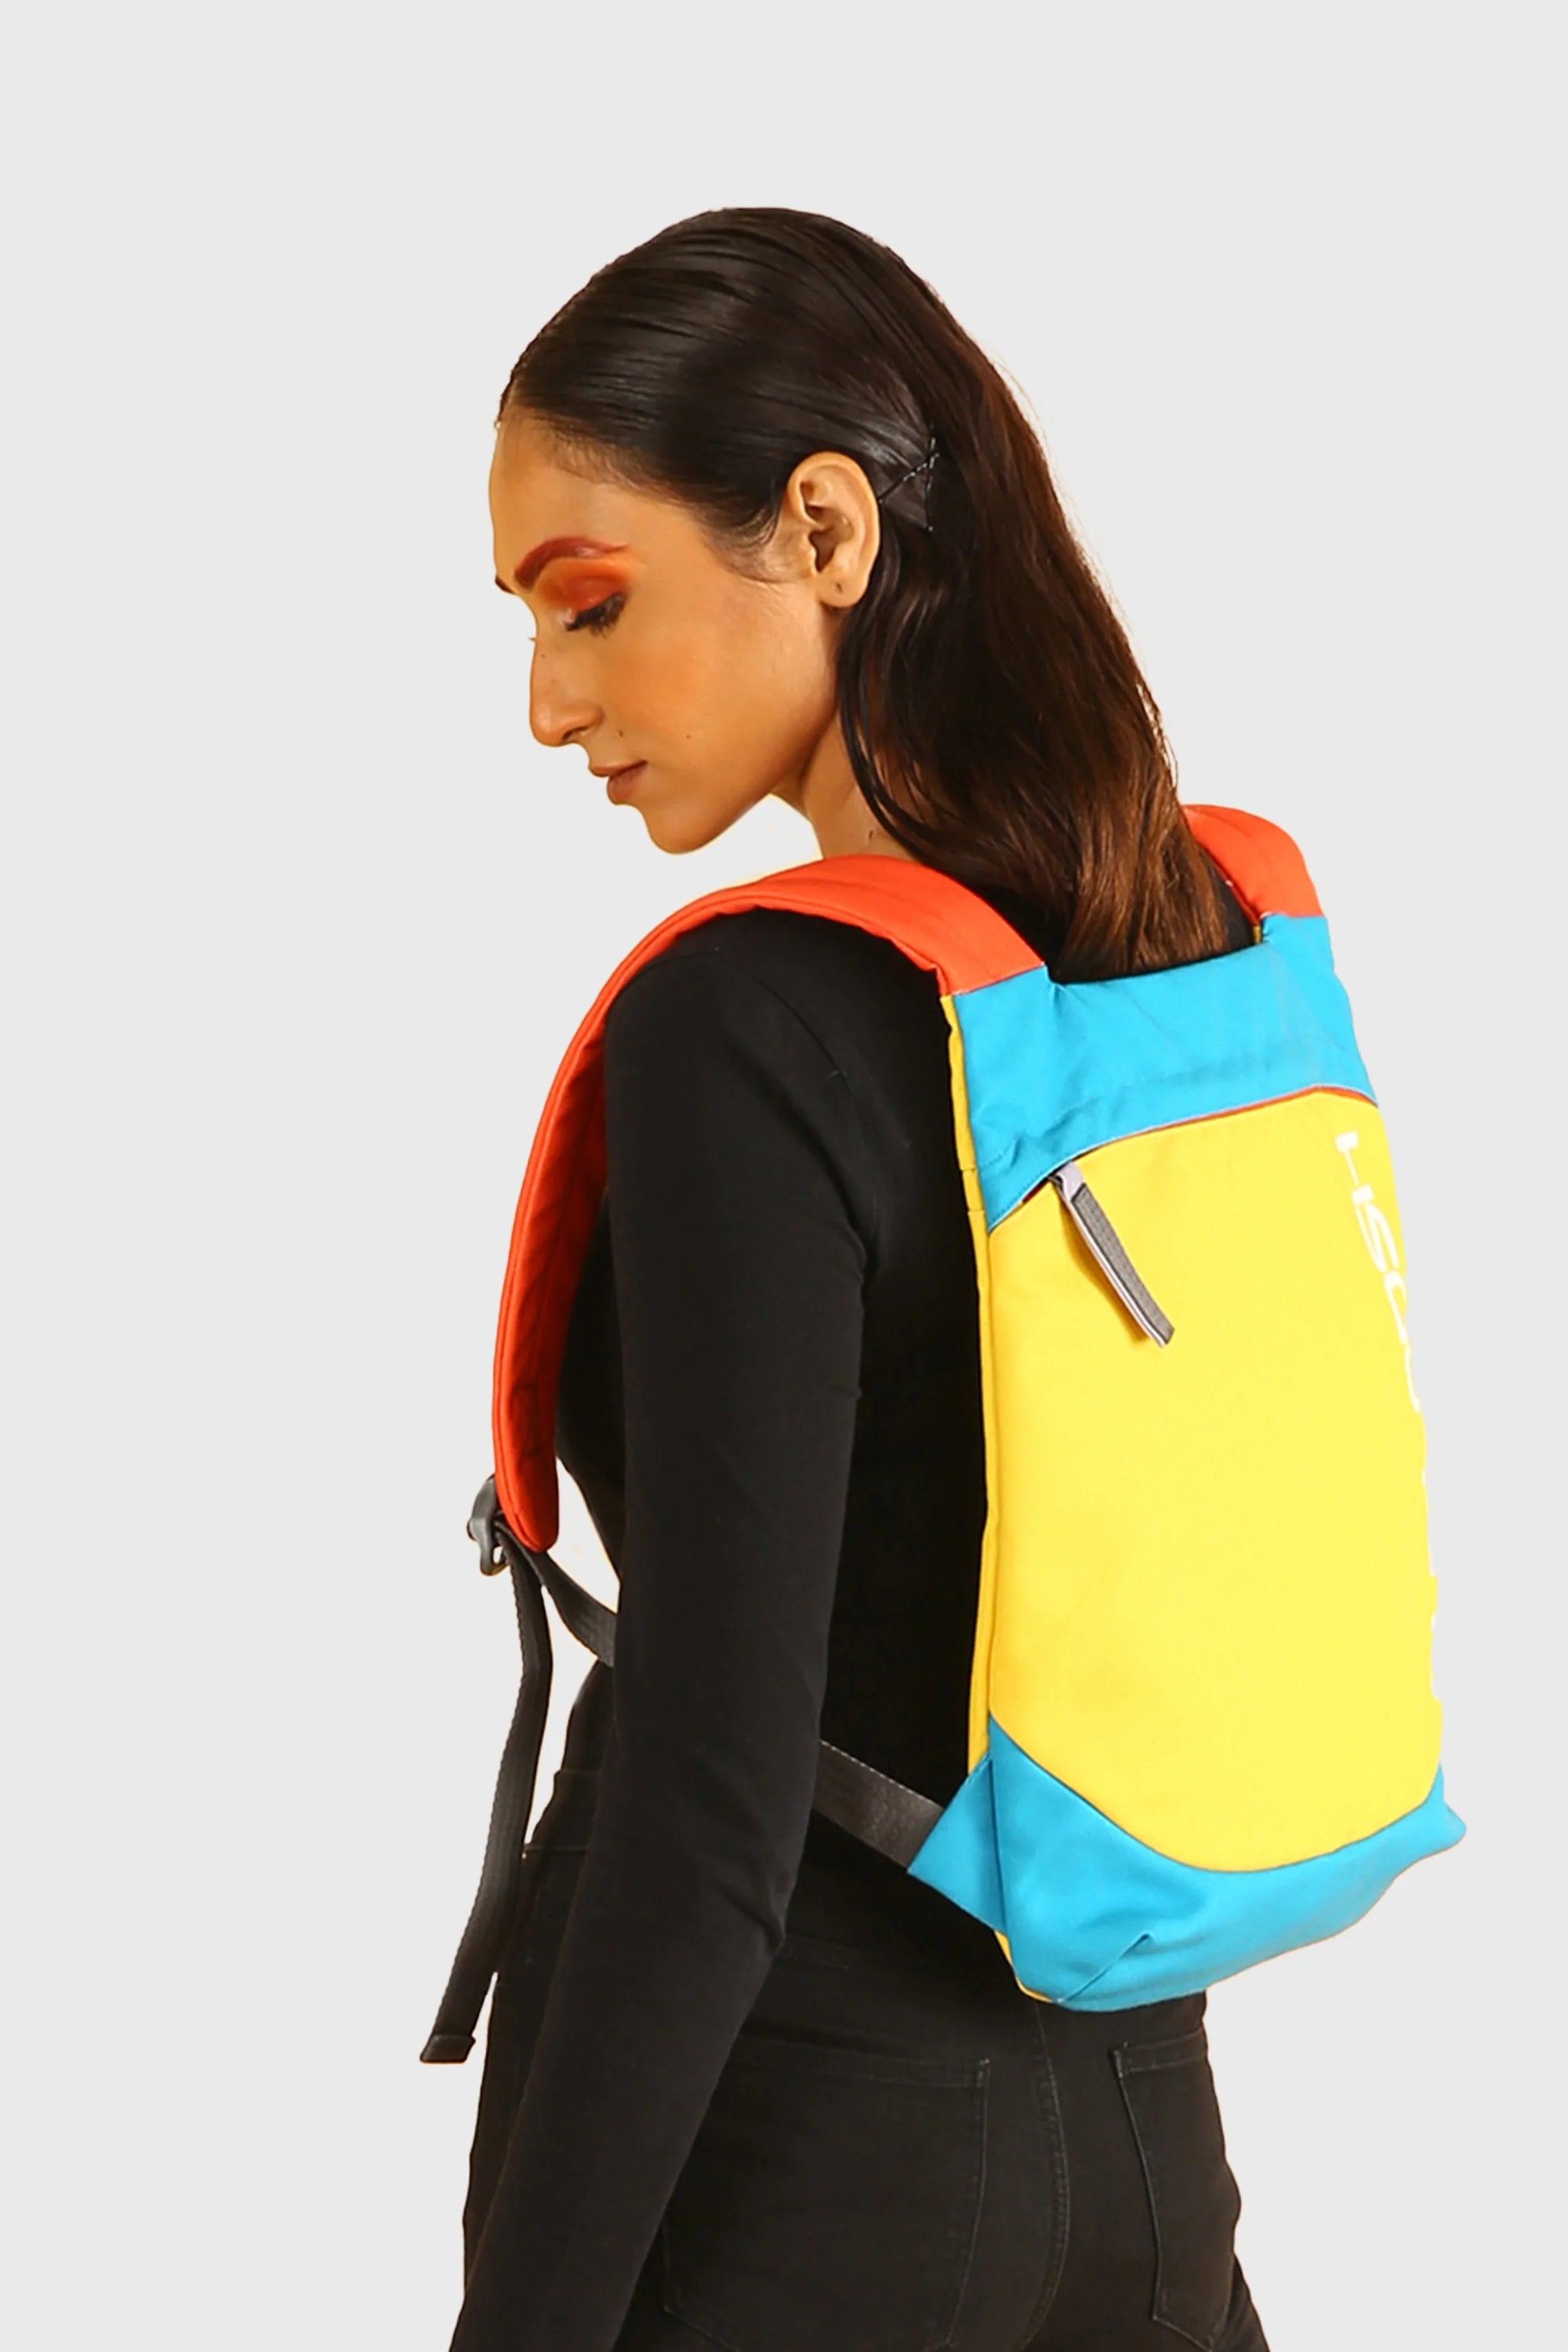 OUTLNDSH Backpack bag yellow color sleek urban style